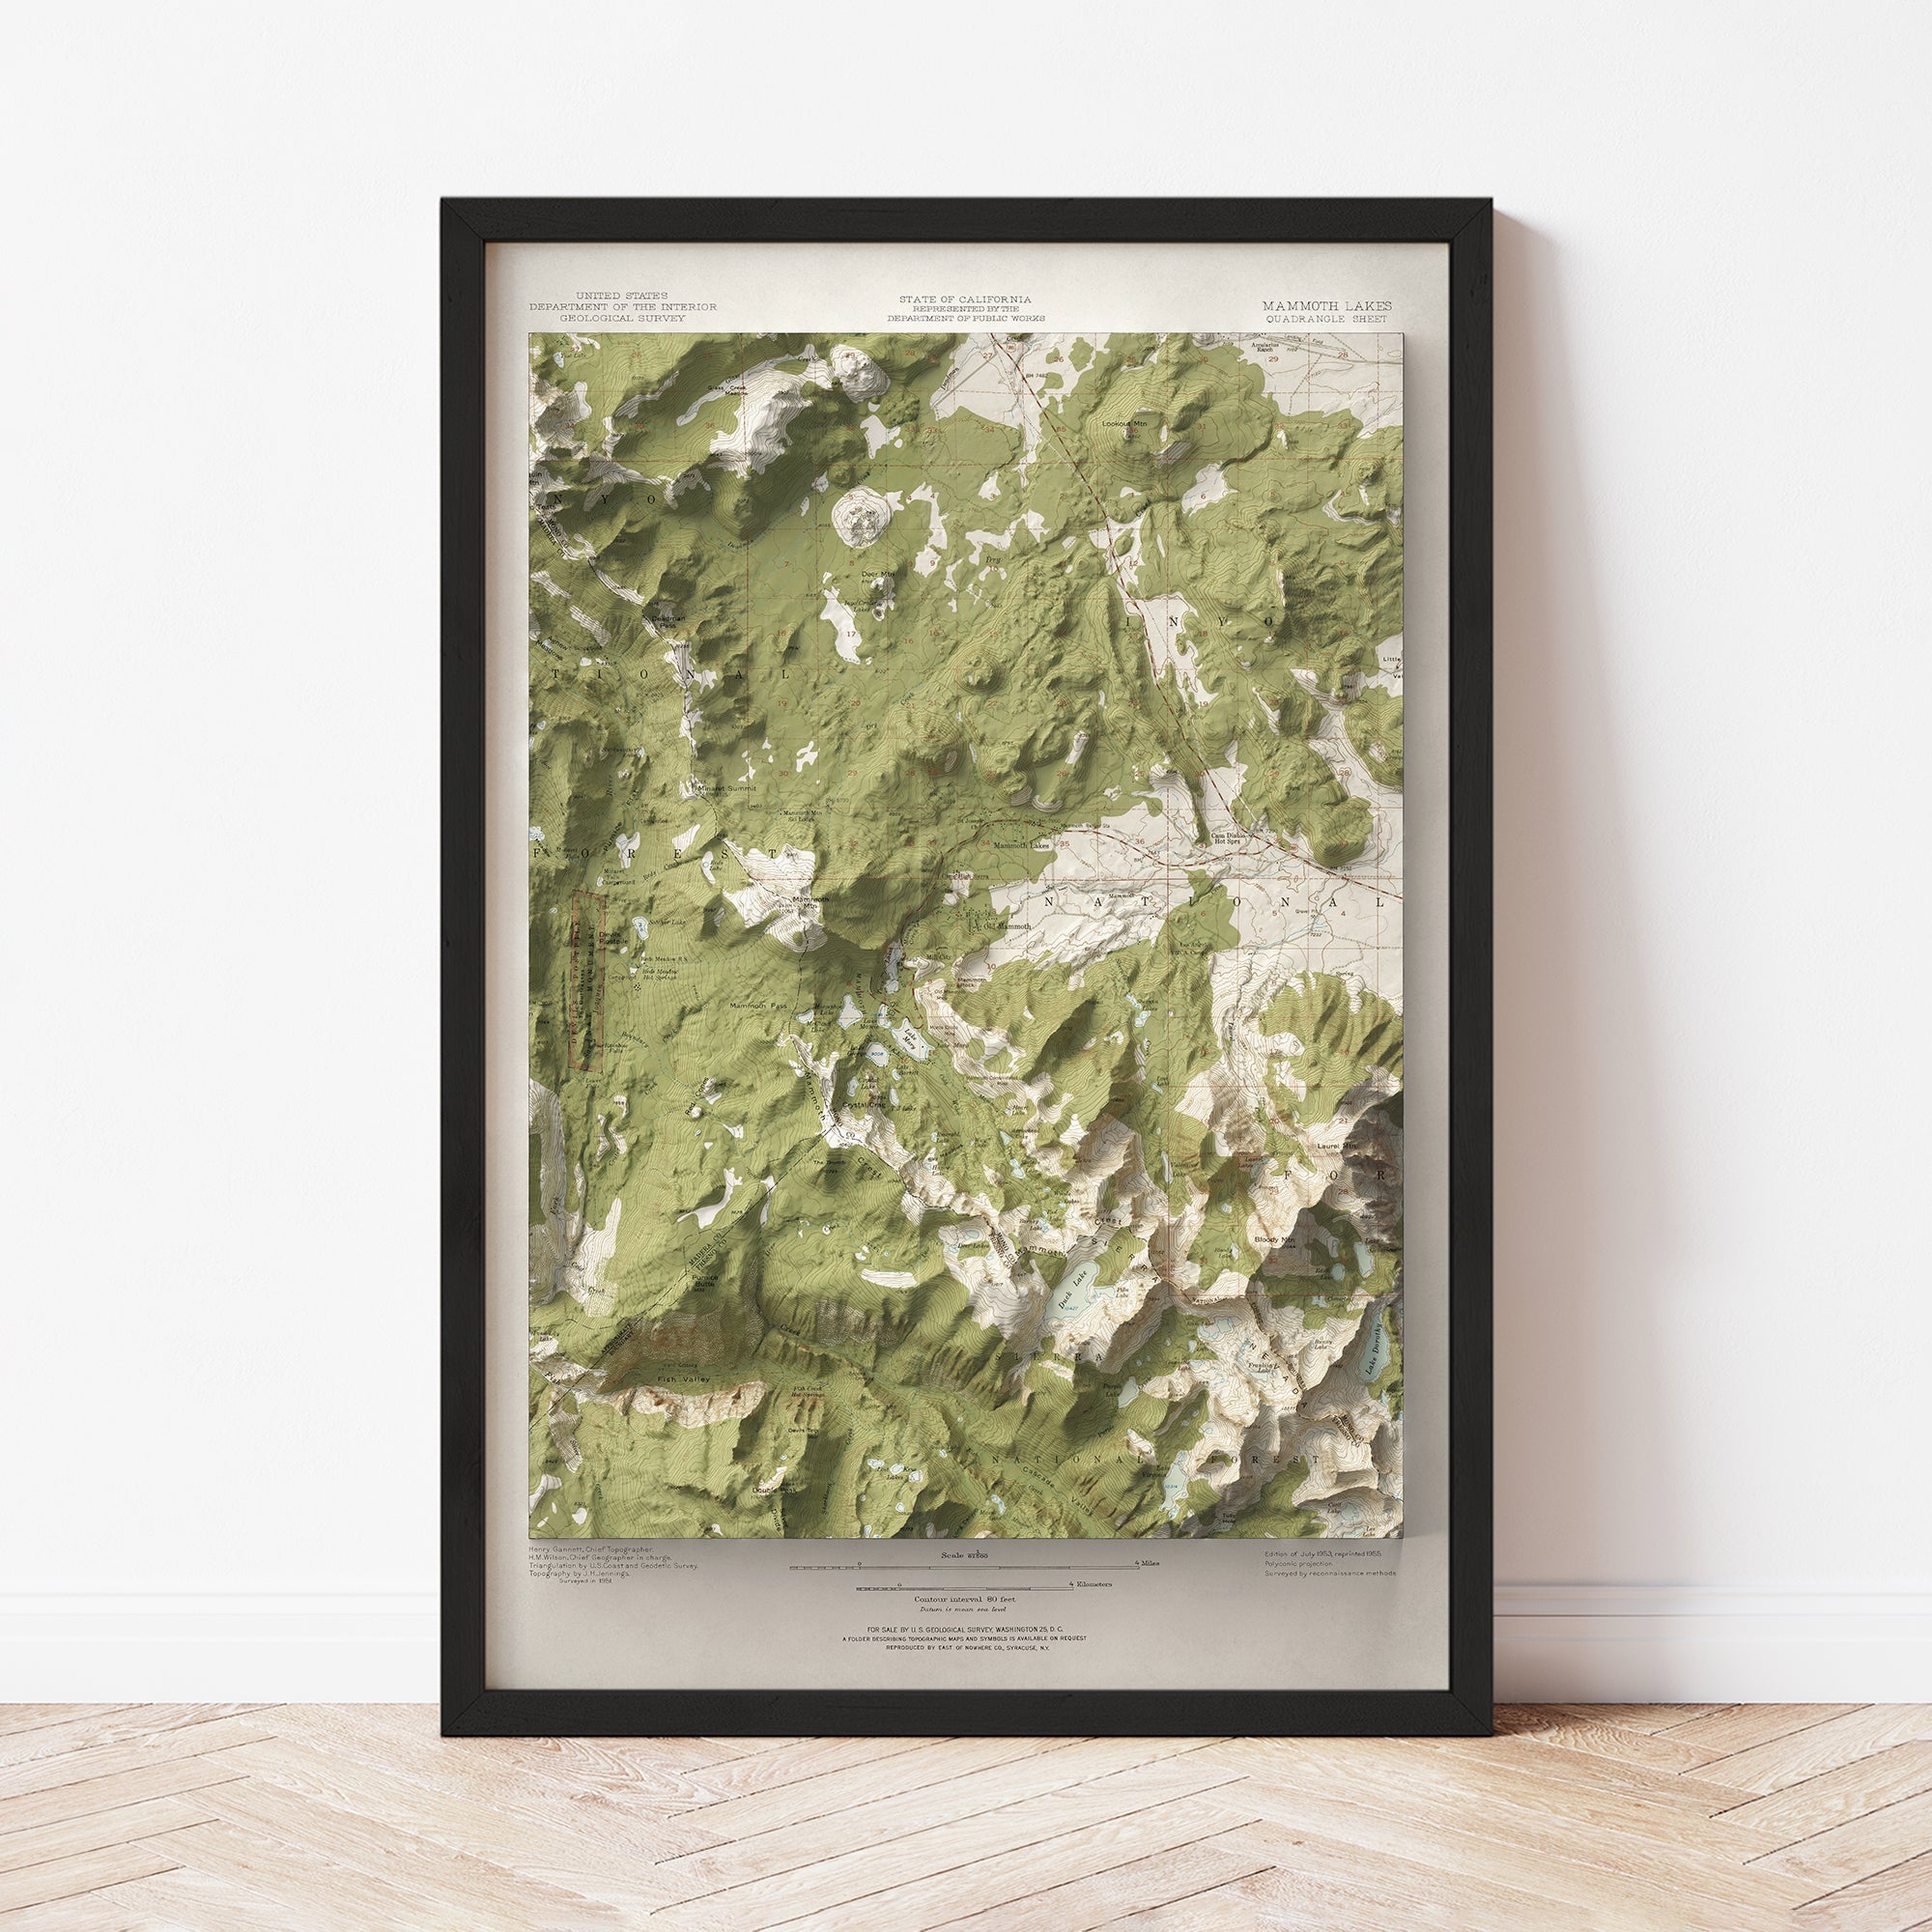 Mammoth Lakes, CA - Vintage Shaded Relief Map (1953)